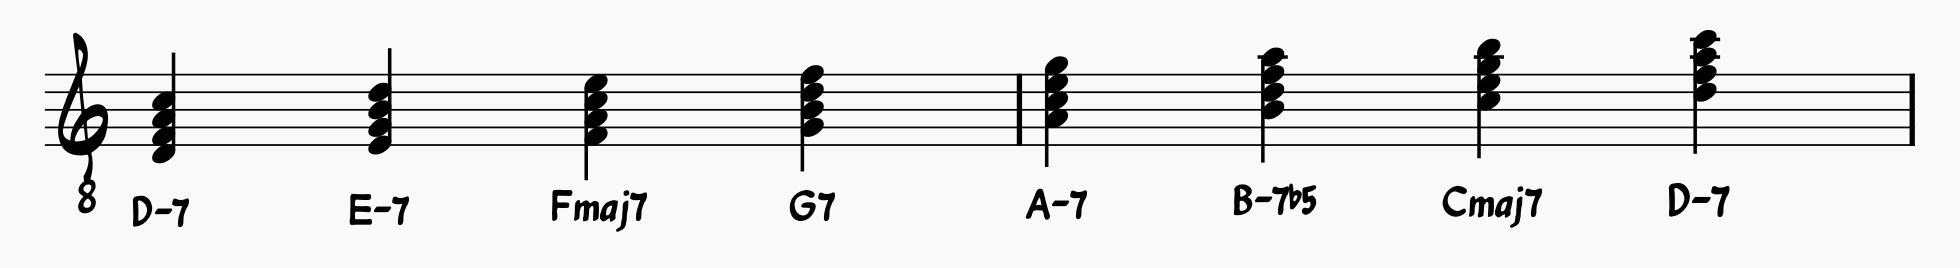 Diatonic Chord scale in D Dorian Mode; one of the modes of C major